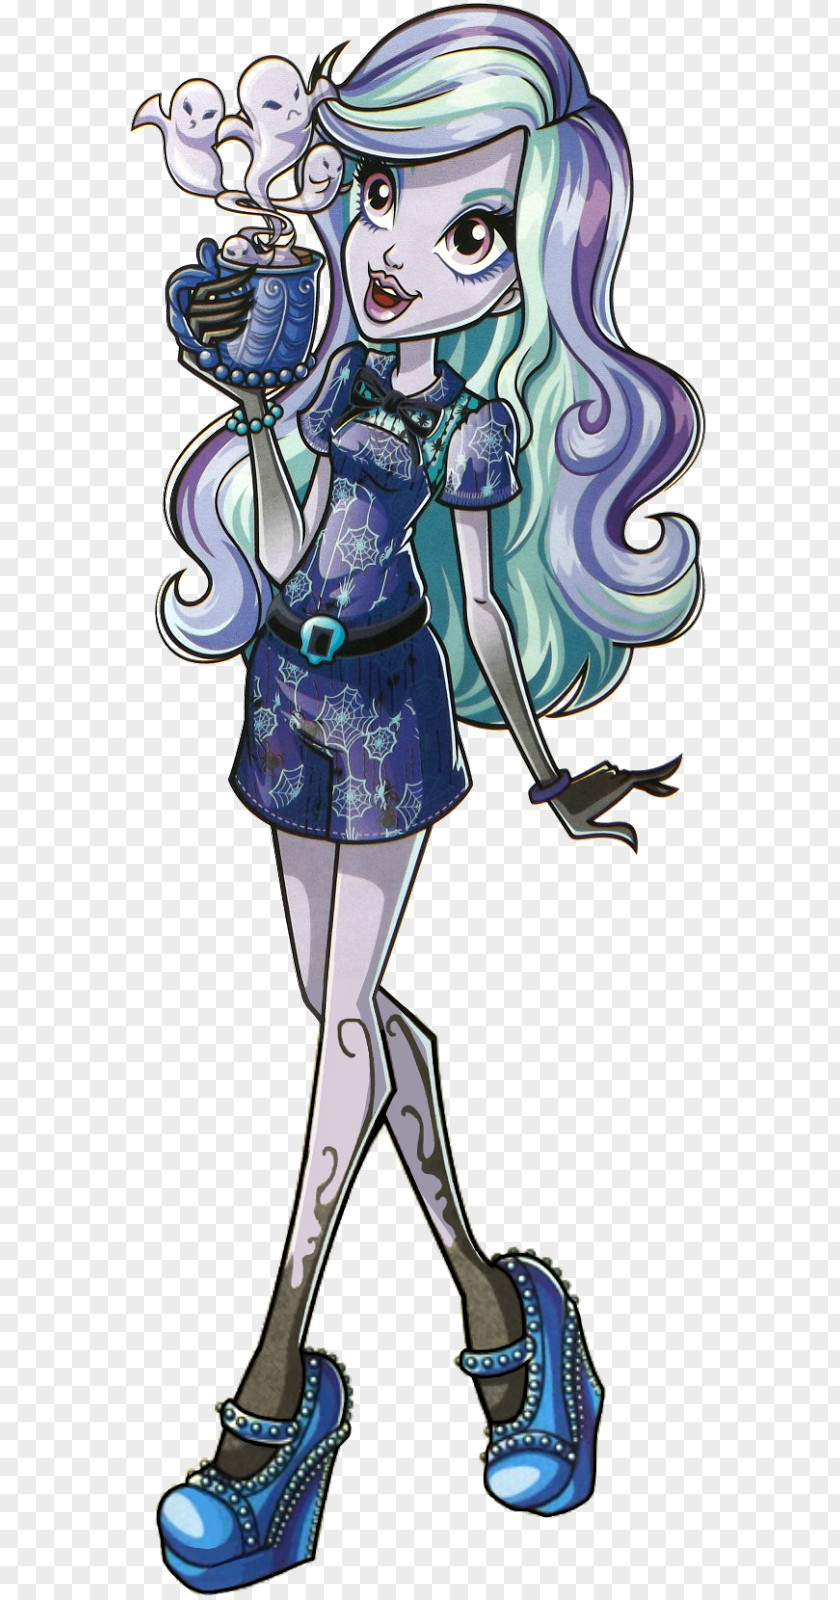 Doll Monster High 13 Wishes Haunt The Casbah Twyla Frankie Stein Boogeyman PNG